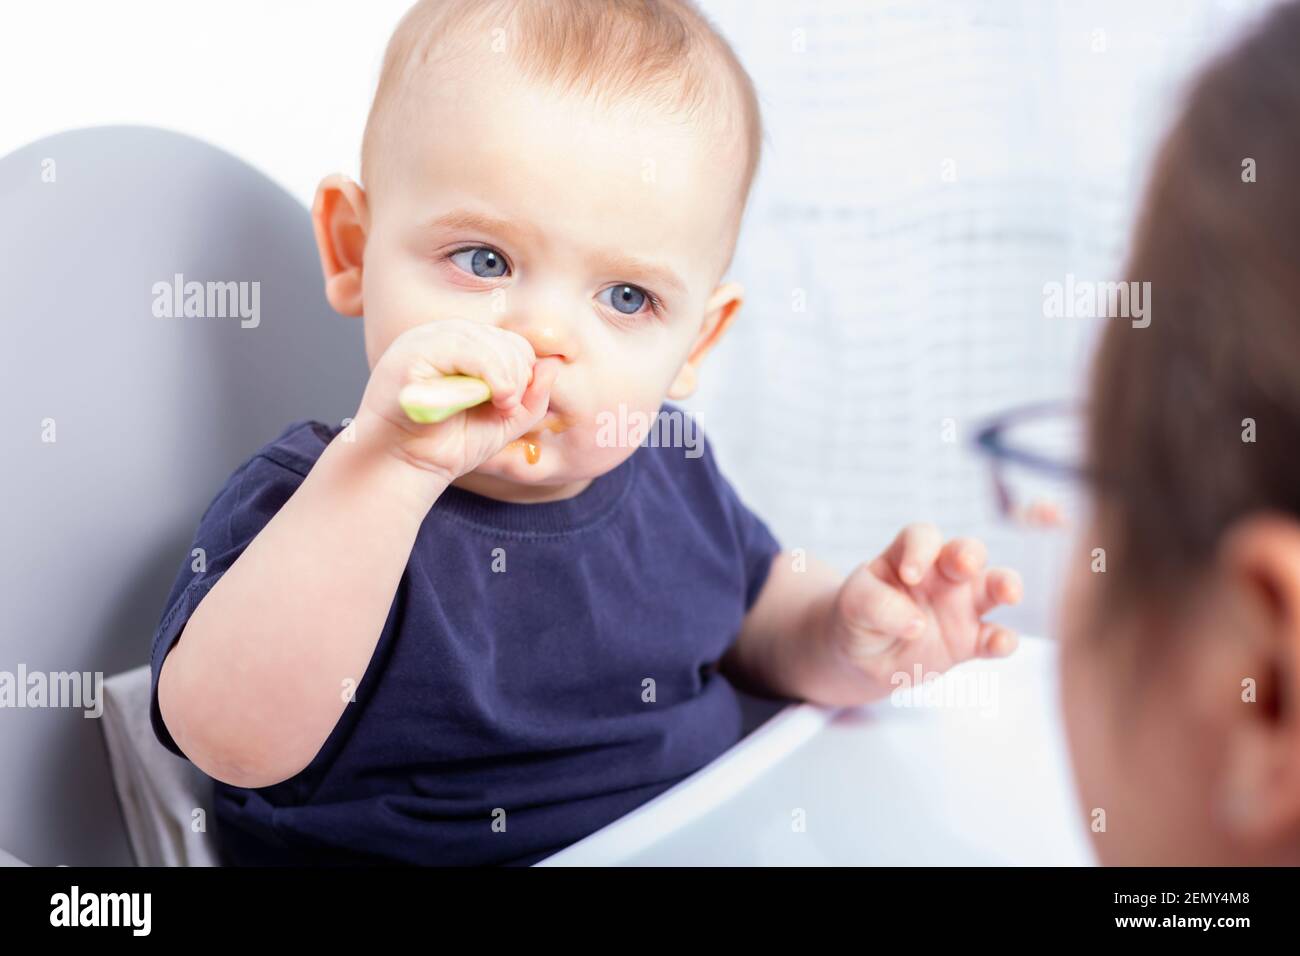 Cute caucasian baby boy is sitting in high chair and eating with plastic spoon. Mom is proud of her son, doesnt help him. Baby is eating on his own. Stock Photo